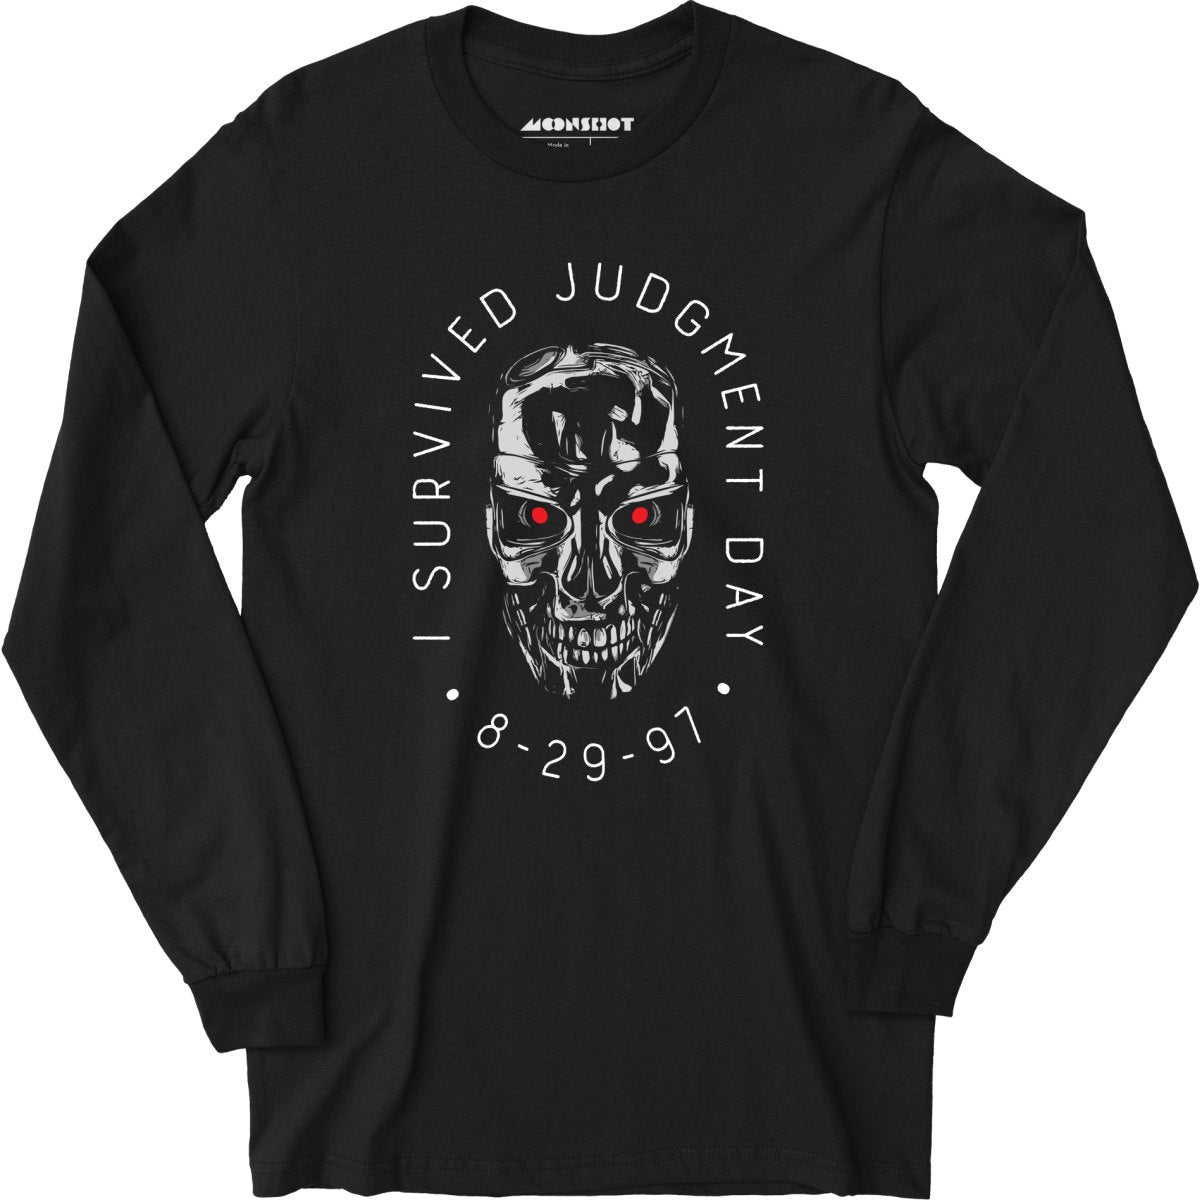 I Survived Judgment Day - Long Sleeve T-Shirt